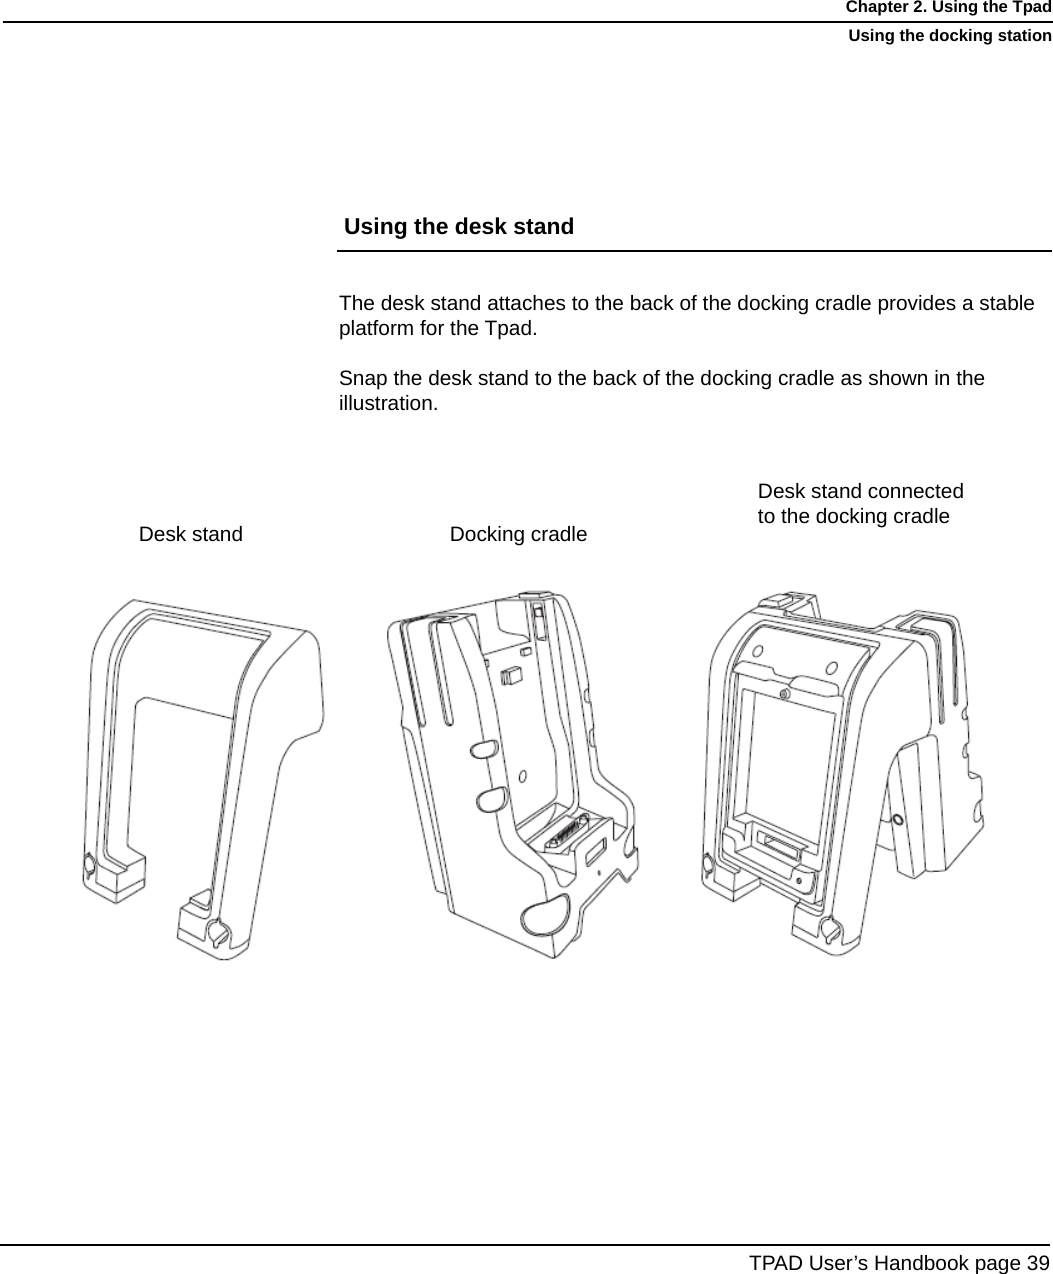 The desk stand attaches to the back of the docking cradle provides a stable platform for the Tpad.Snap the desk stand to the back of the docking cradle as shown in the illustration.TPAD User’s Handbook page 39Chapter 2. Using the TpadUsing the docking stationUsing the desk standDesk stand  Docking cradleDesk stand connectedto the docking cradle